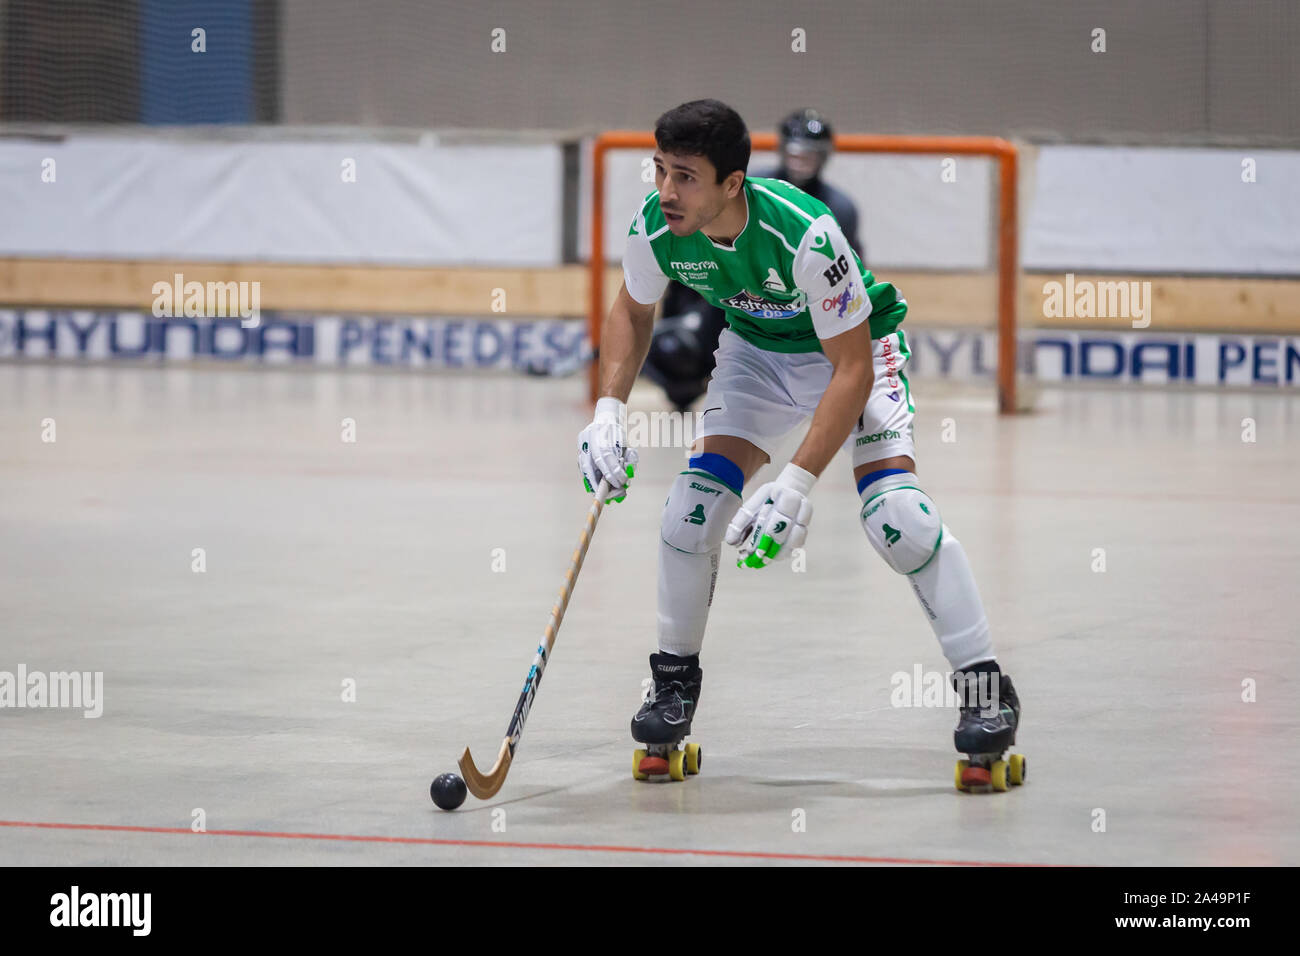 Maximiliano Oruste Salva roller hockey player of Deportivo Liceo in action at Spanish OK League match between CP Calafell and Deportivo Liceo Stock Photo